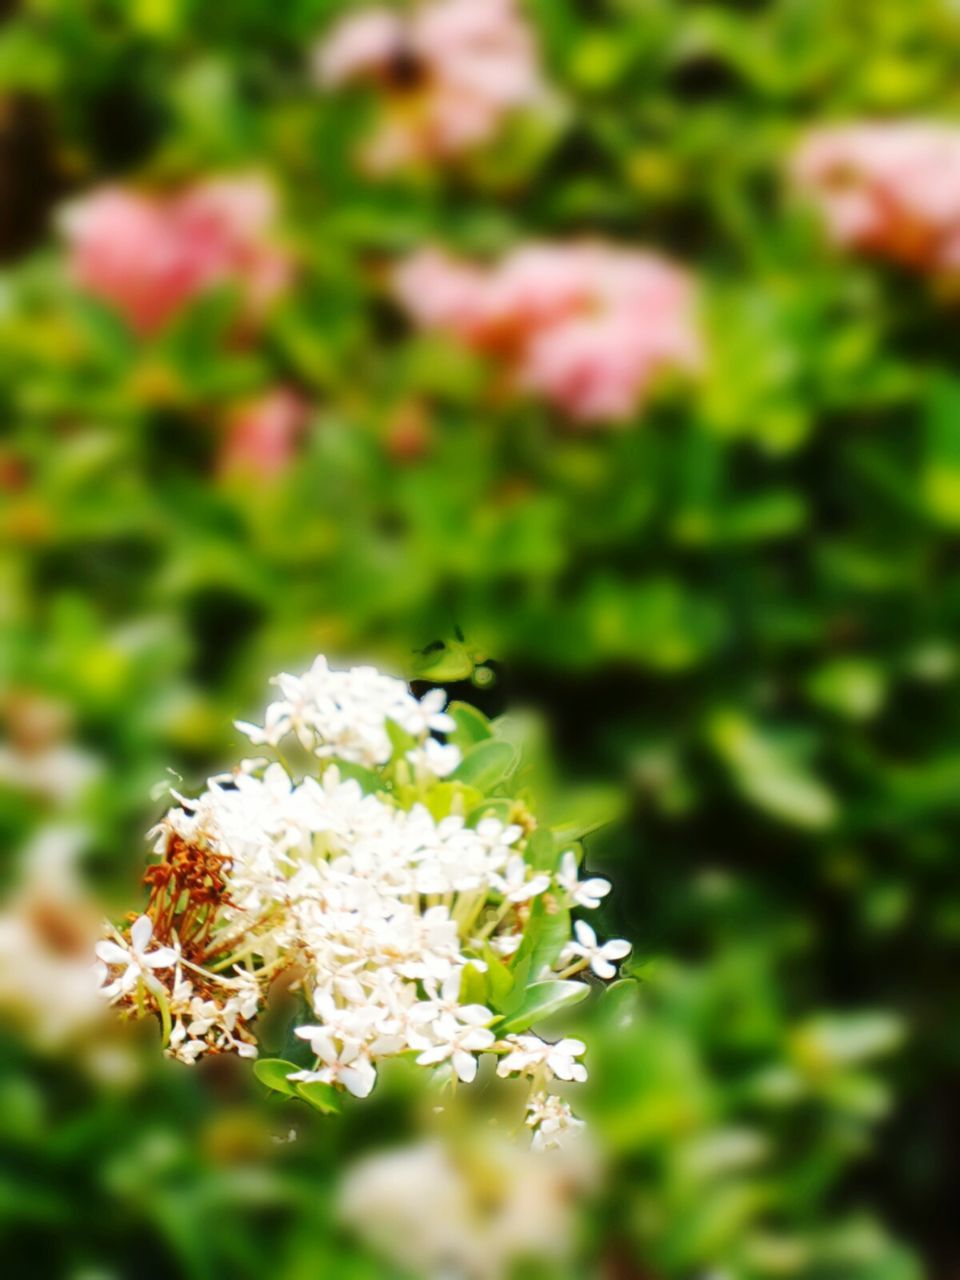 flower, freshness, fragility, petal, white color, growth, focus on foreground, flower head, beauty in nature, blooming, nature, close-up, plant, in bloom, blossom, selective focus, day, outdoors, no people, pollen, white, botany, stamen